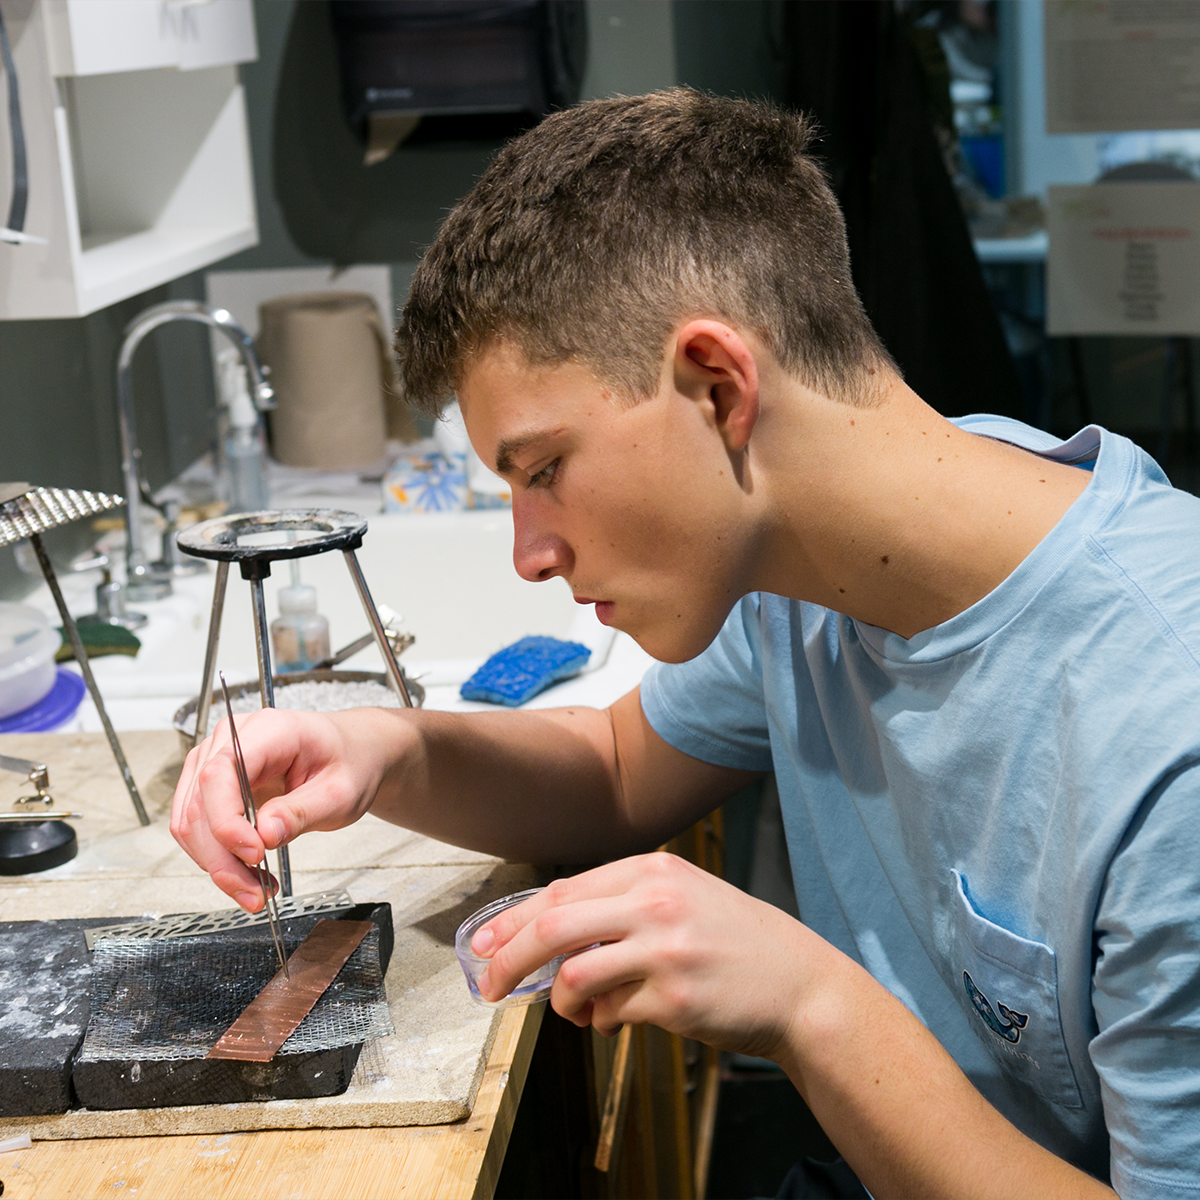 Student working with tweezers at metal smithing bench